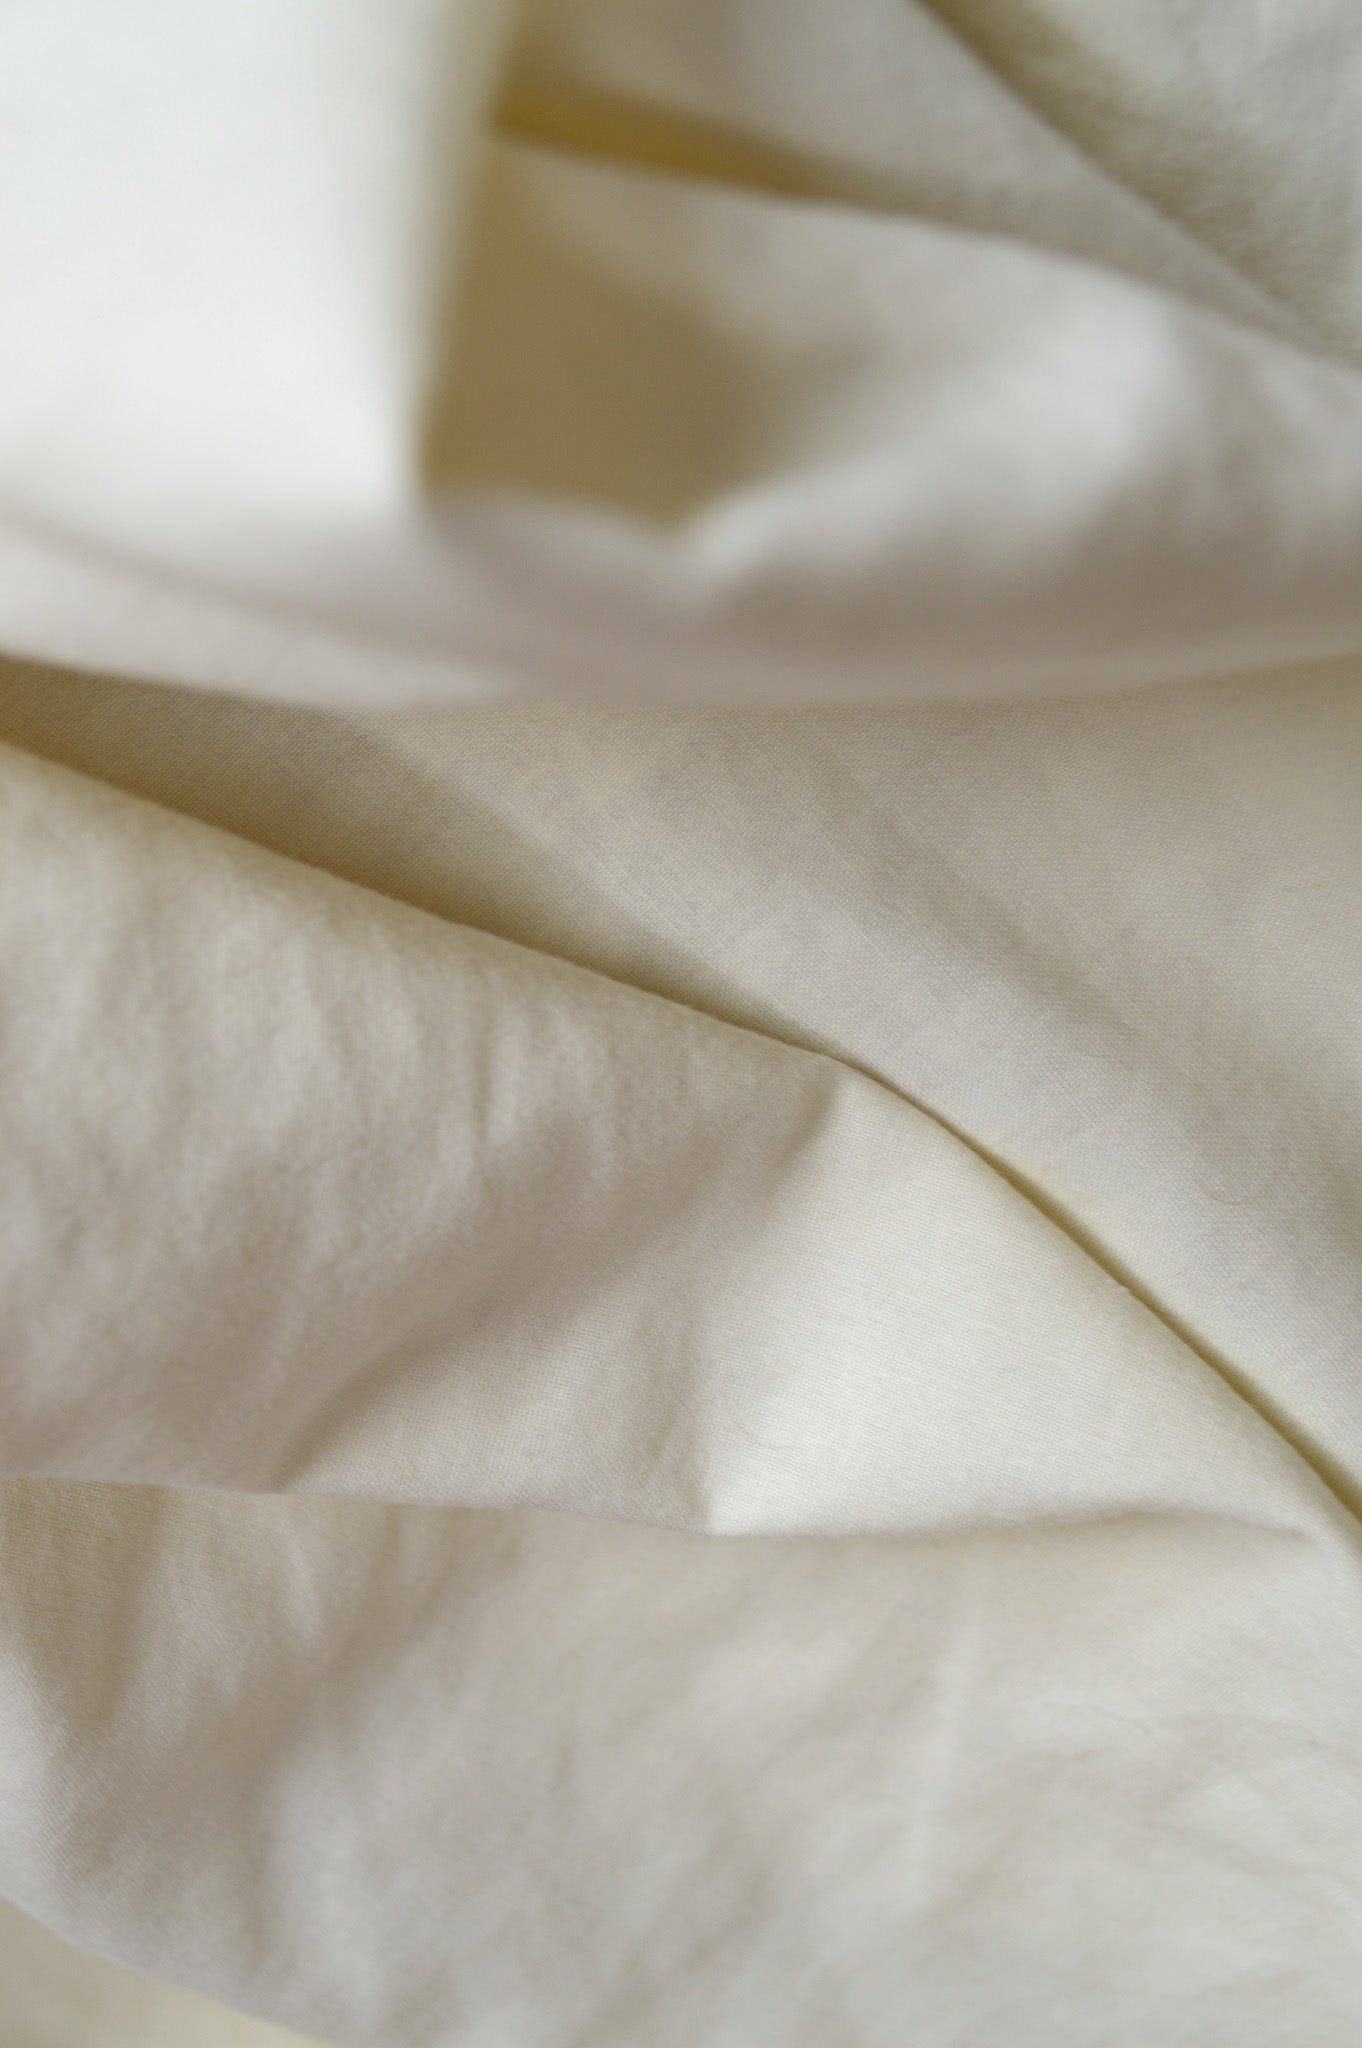 The benefits of linen in home textiles and how to care for them